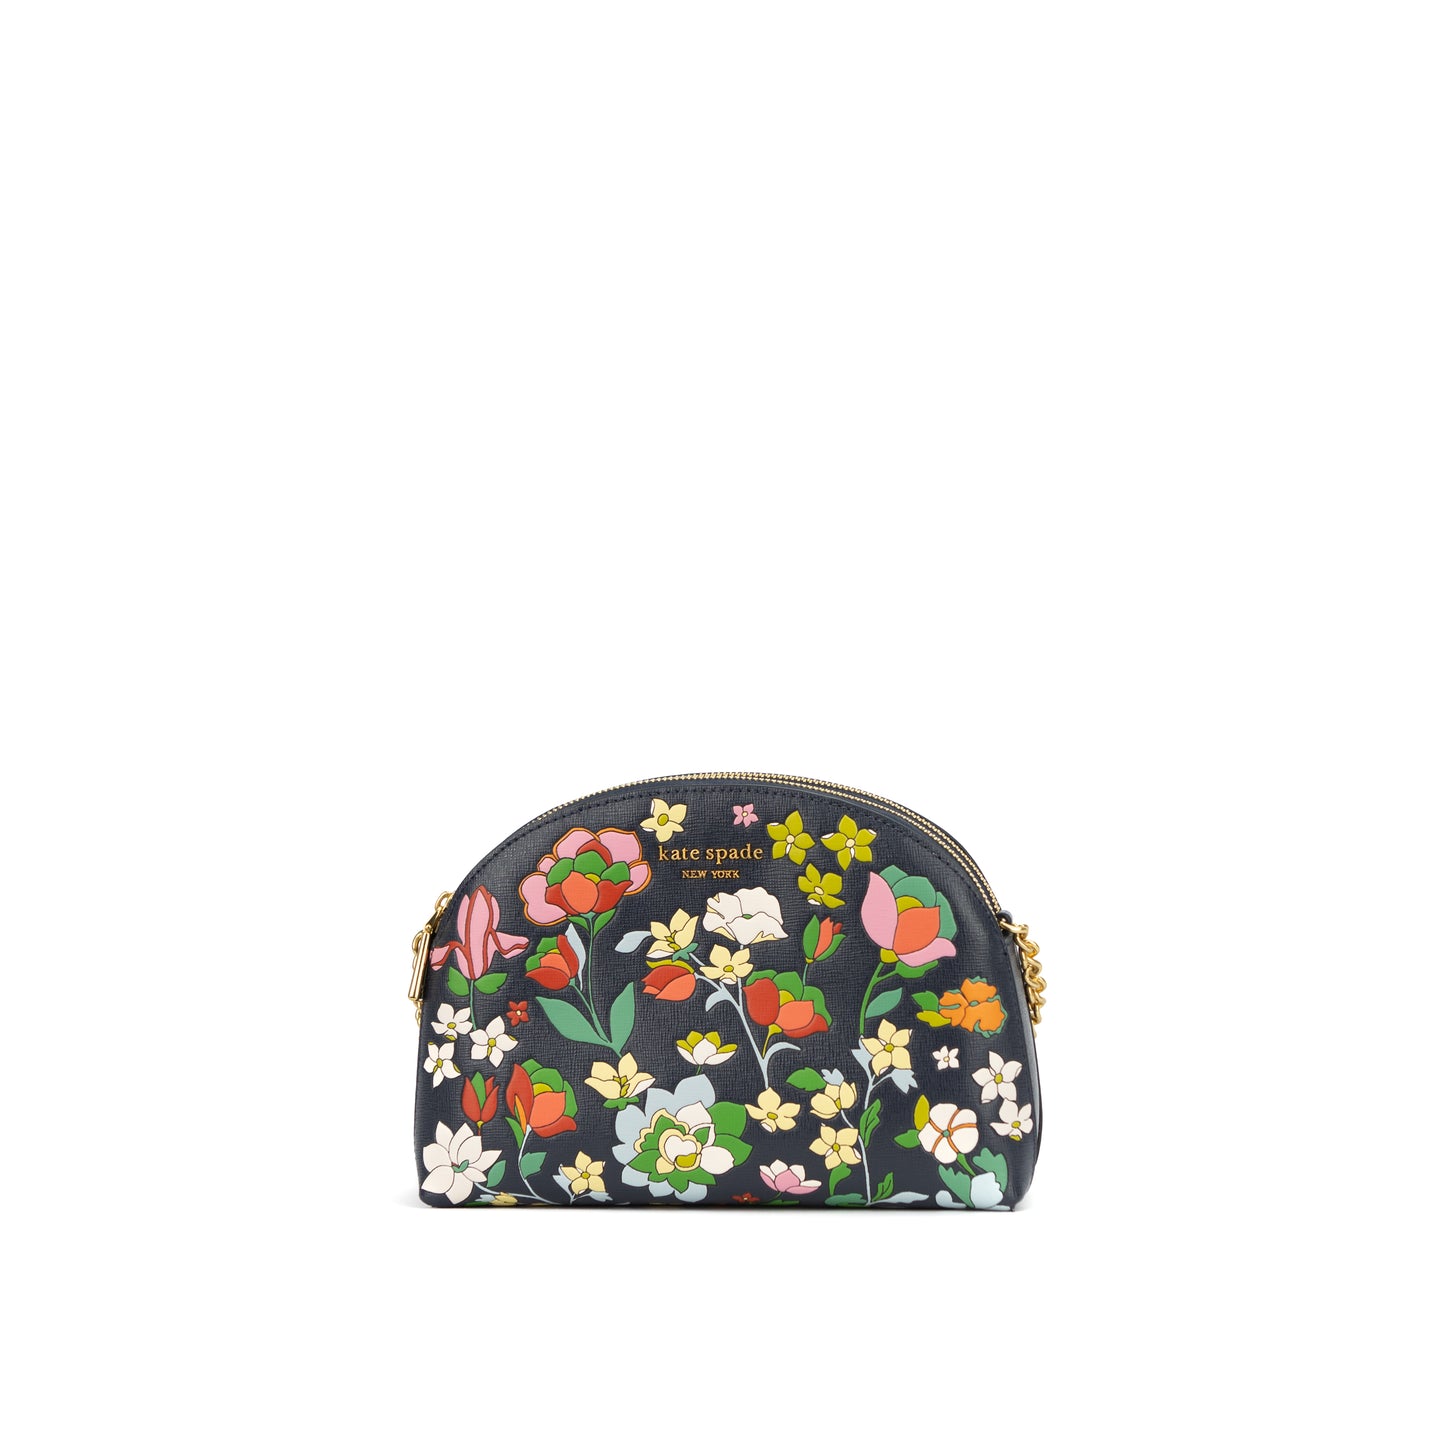 Kate Spade New York -  Morgan Flower Bed Embossed Saffiano Leather Double Zip Dome Crossbody - Cherrywood - KB246